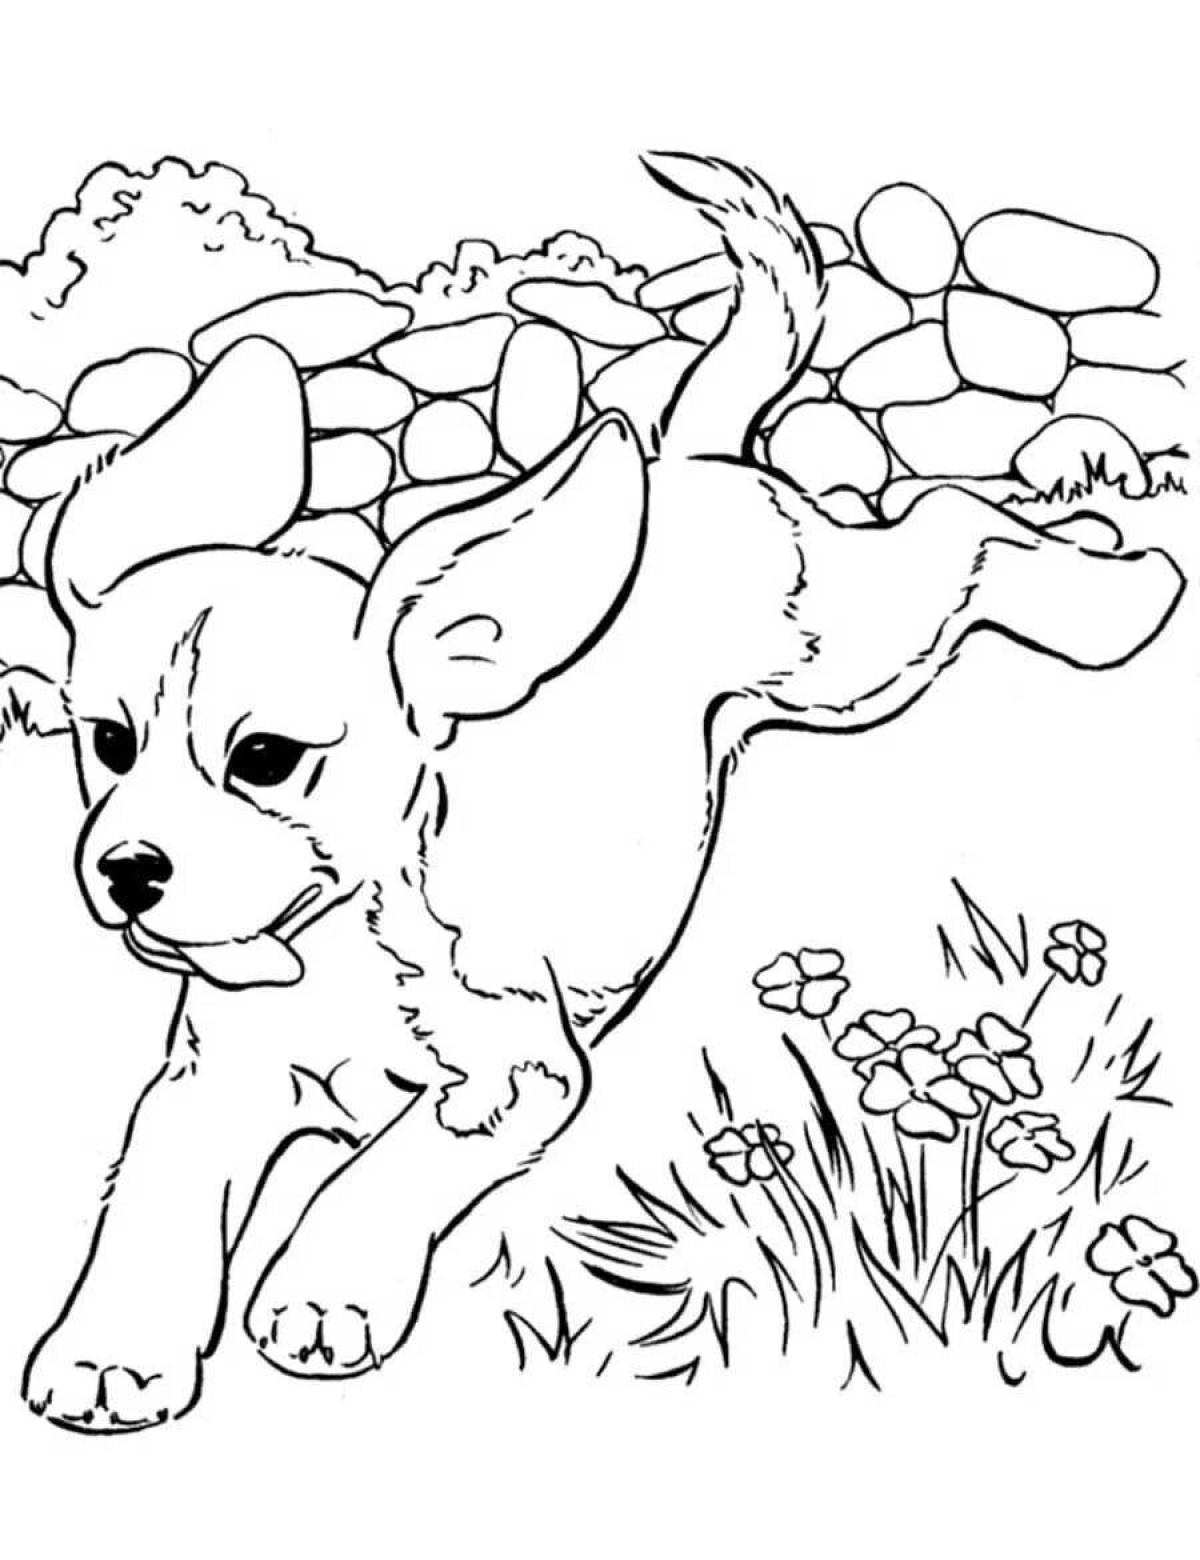 Animal coloring book for kids 6-10 years old